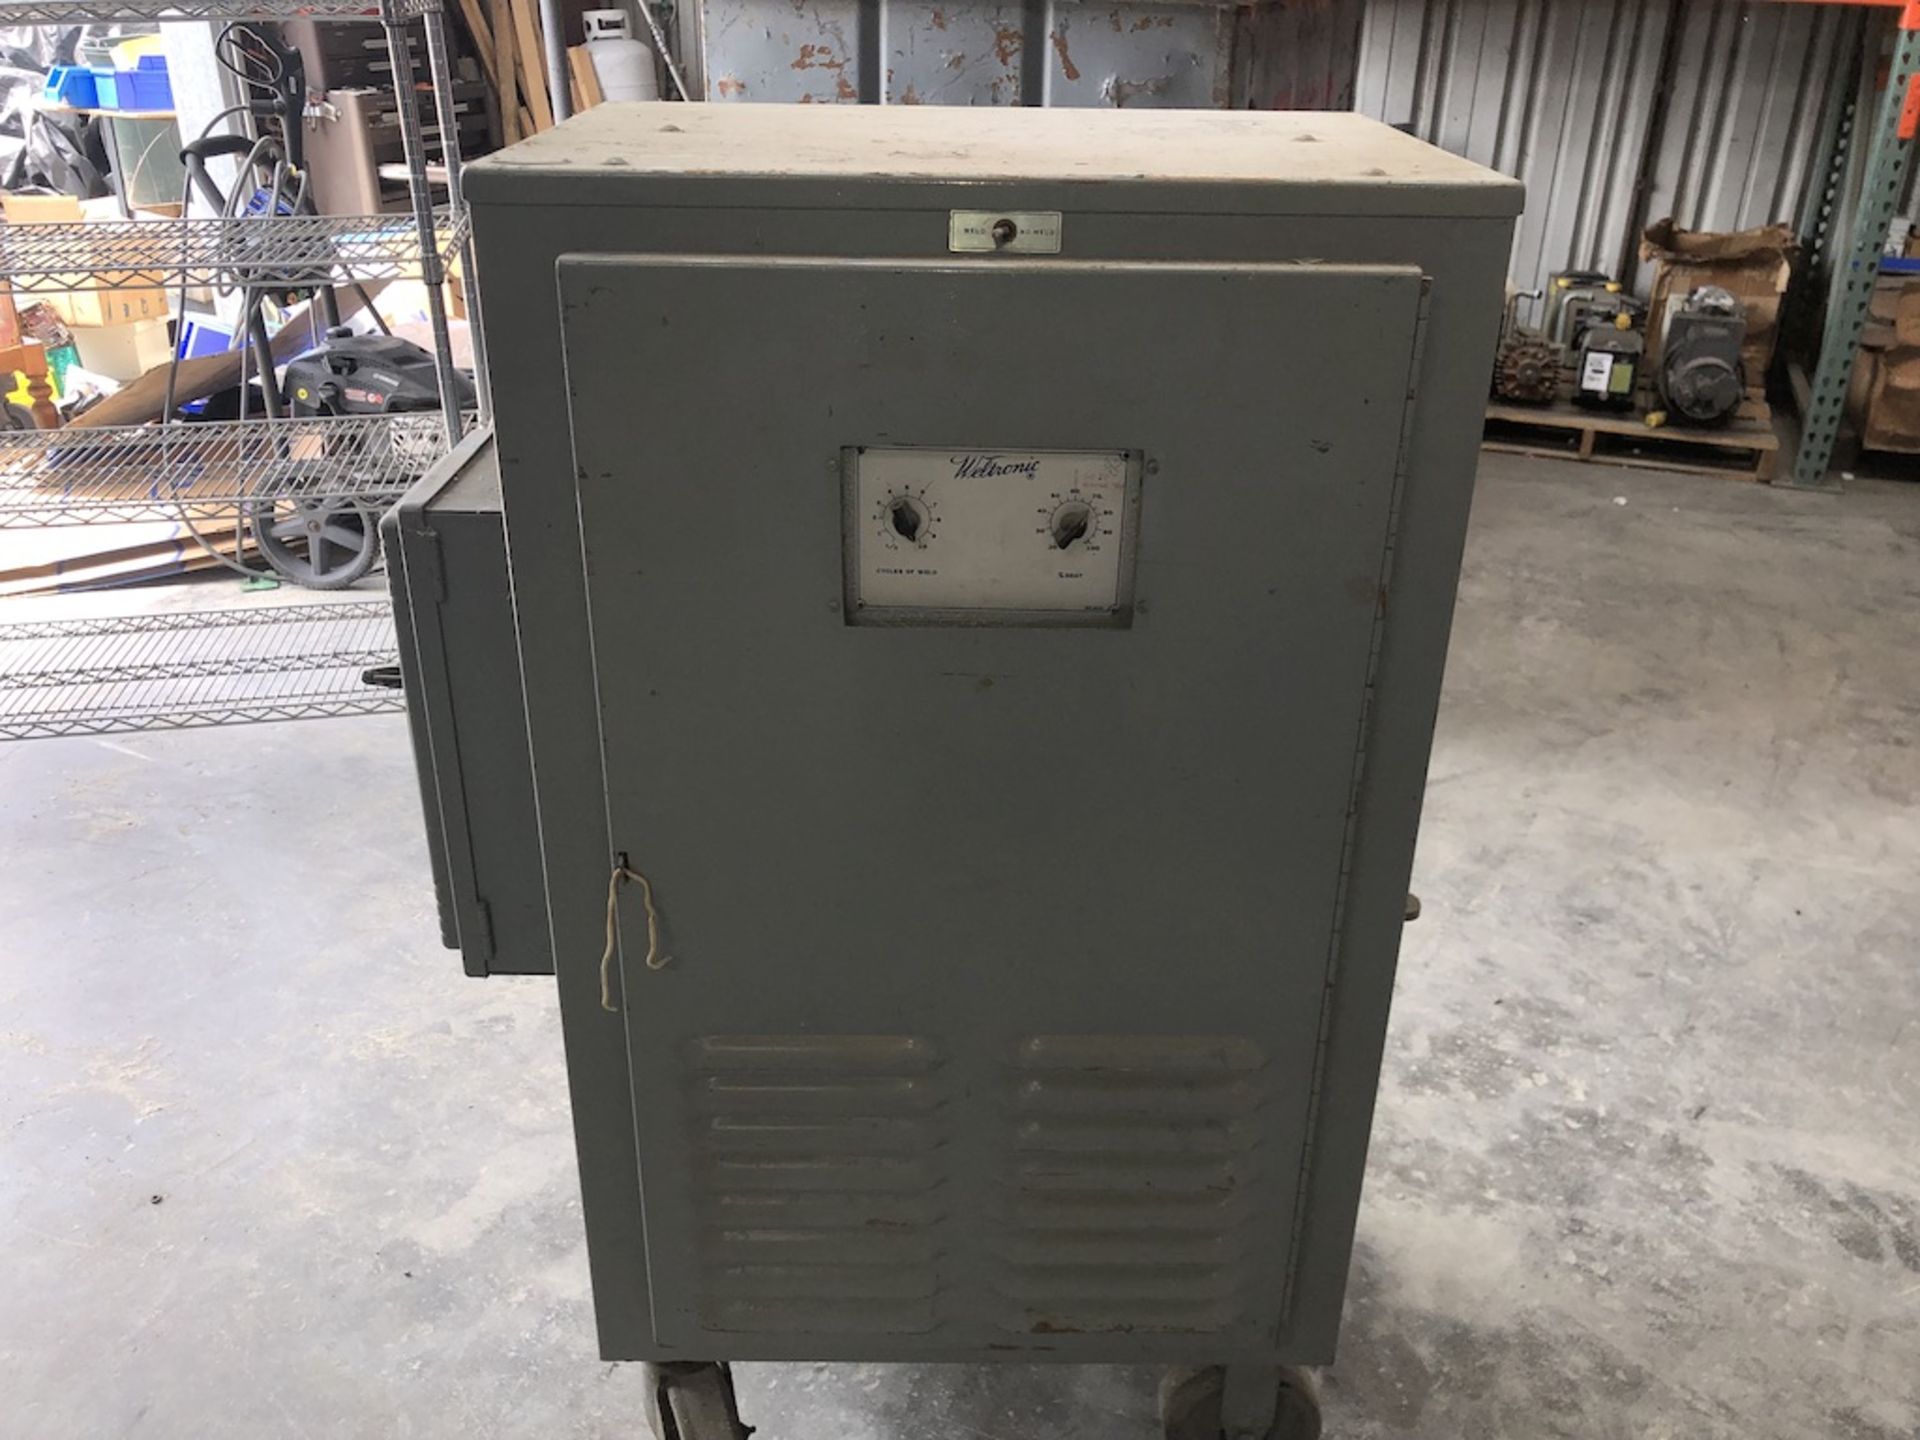 WELTRONIC WELDING MACHINE P-108 TYPE P TAP SWITCH 100 AMP 600V - Image 3 of 7